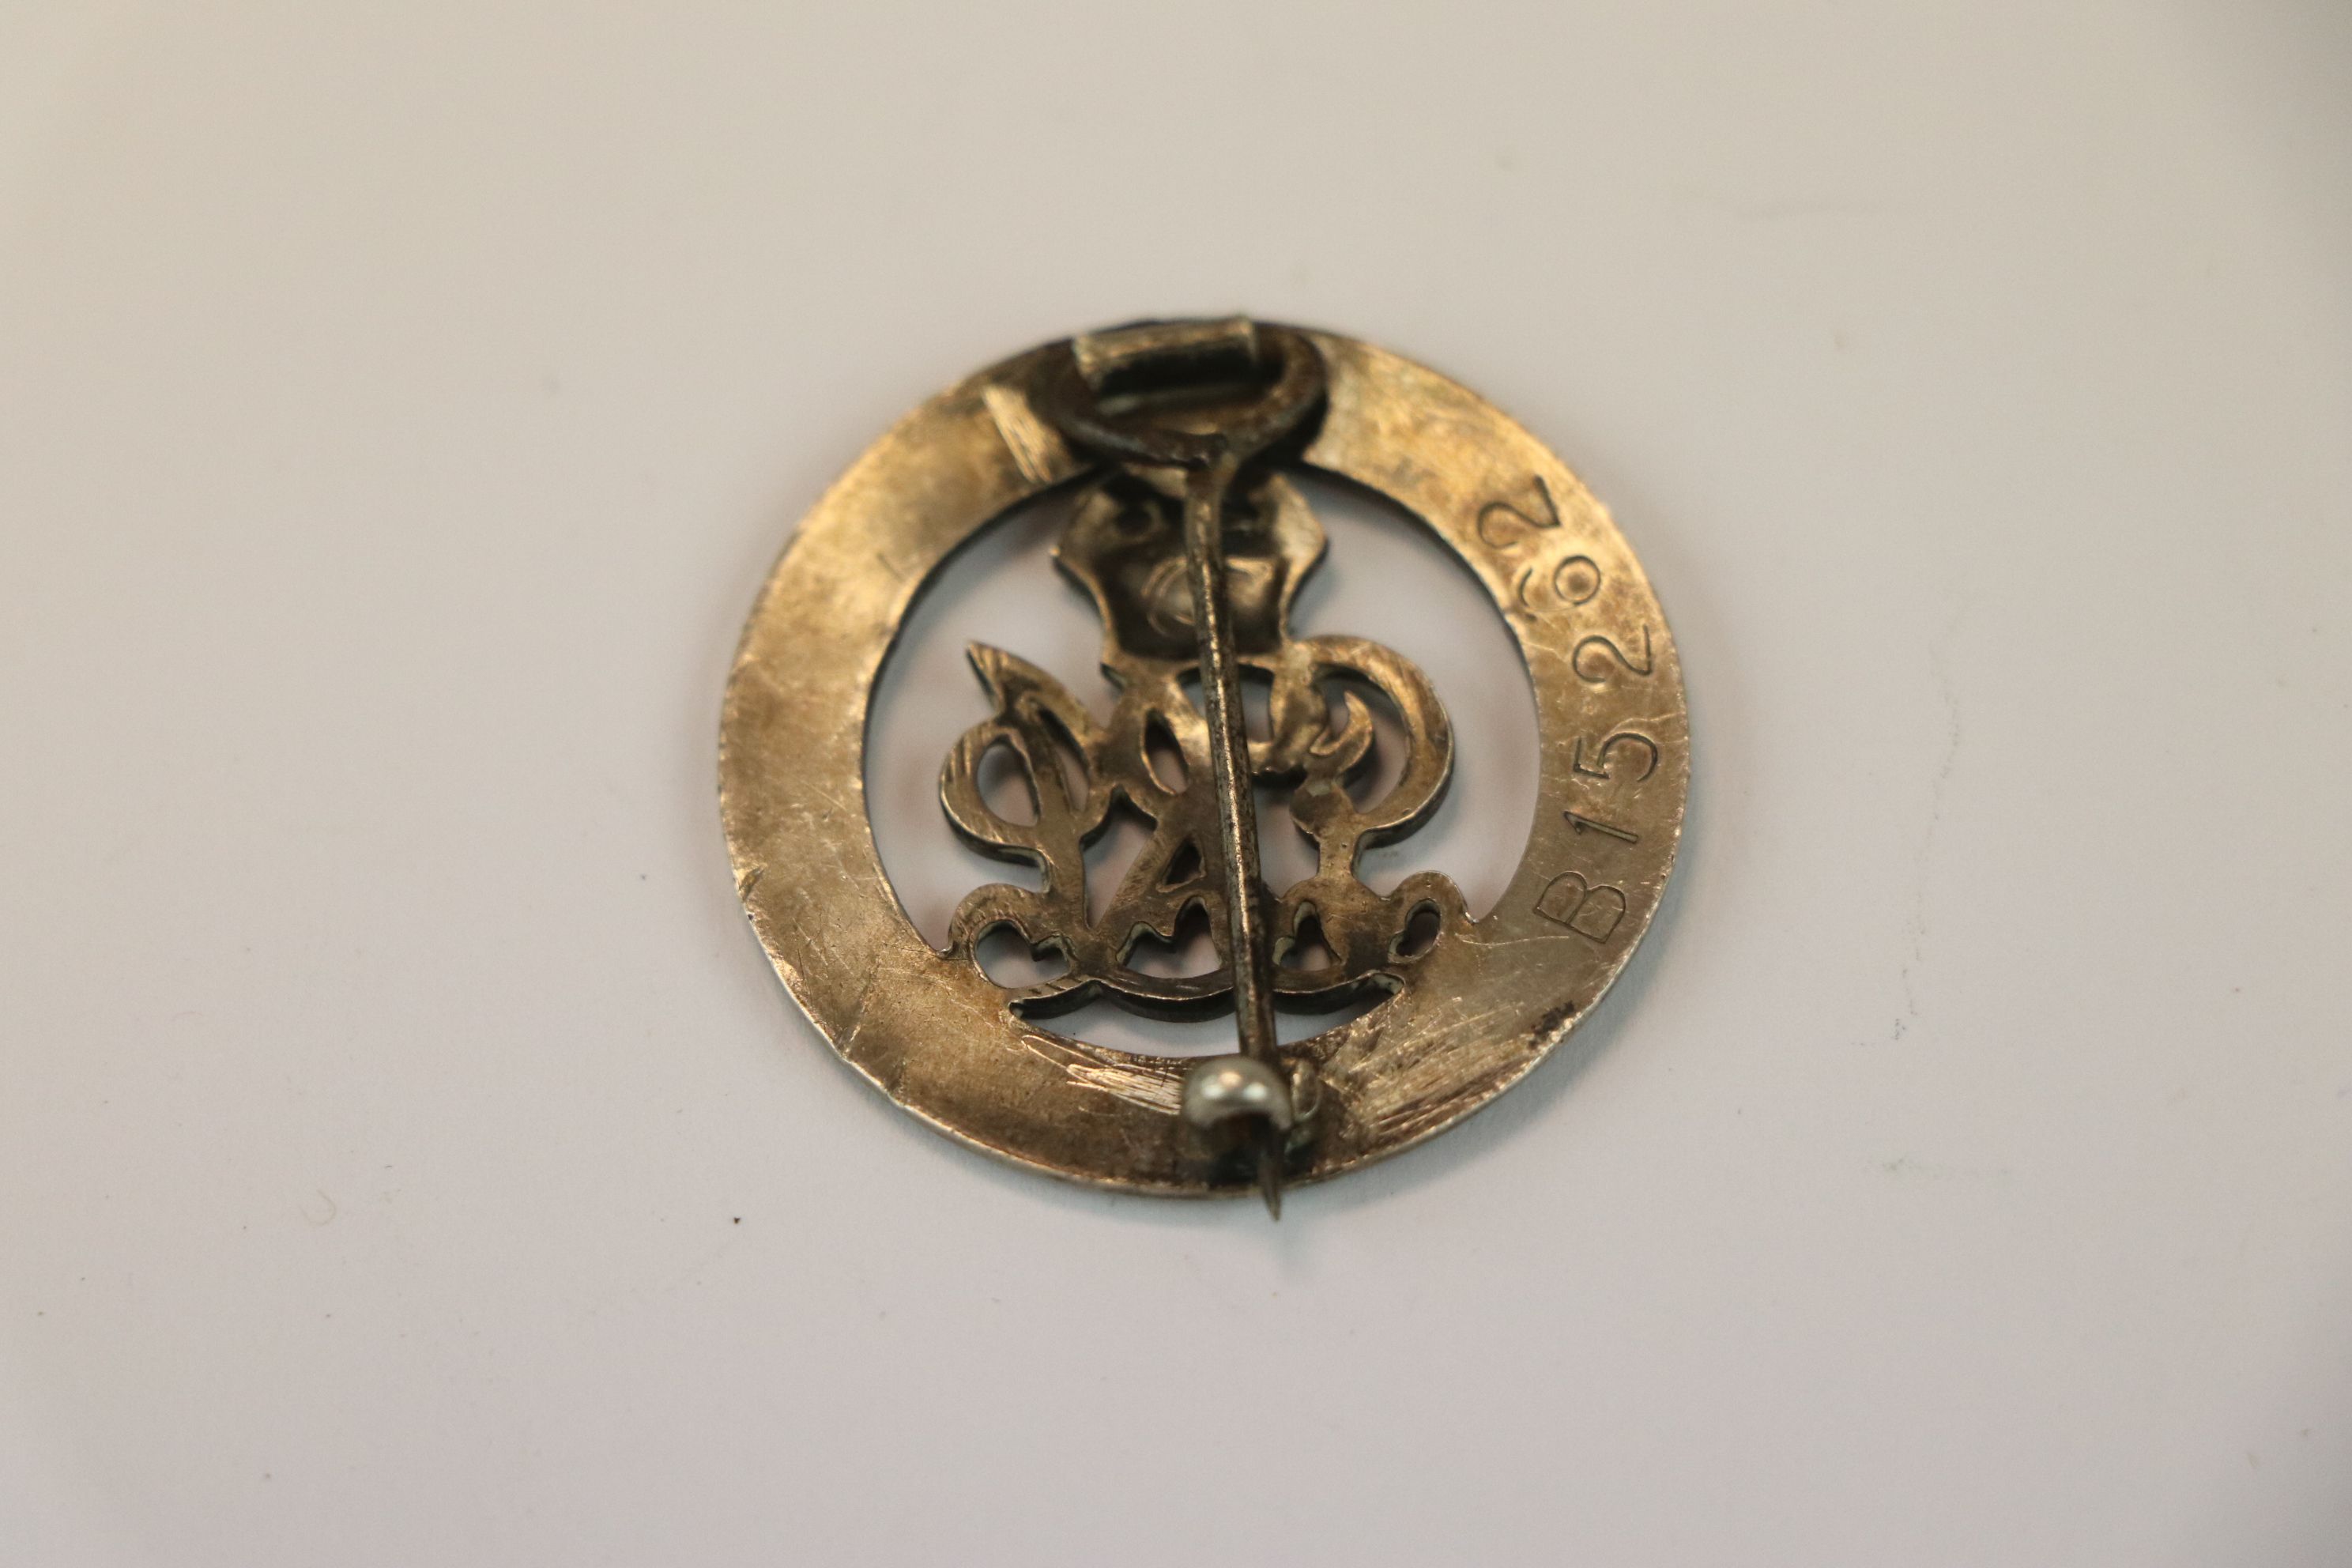 A British World War One / WW1 Silver Wound Badge Issued To B15262. - Image 4 of 4